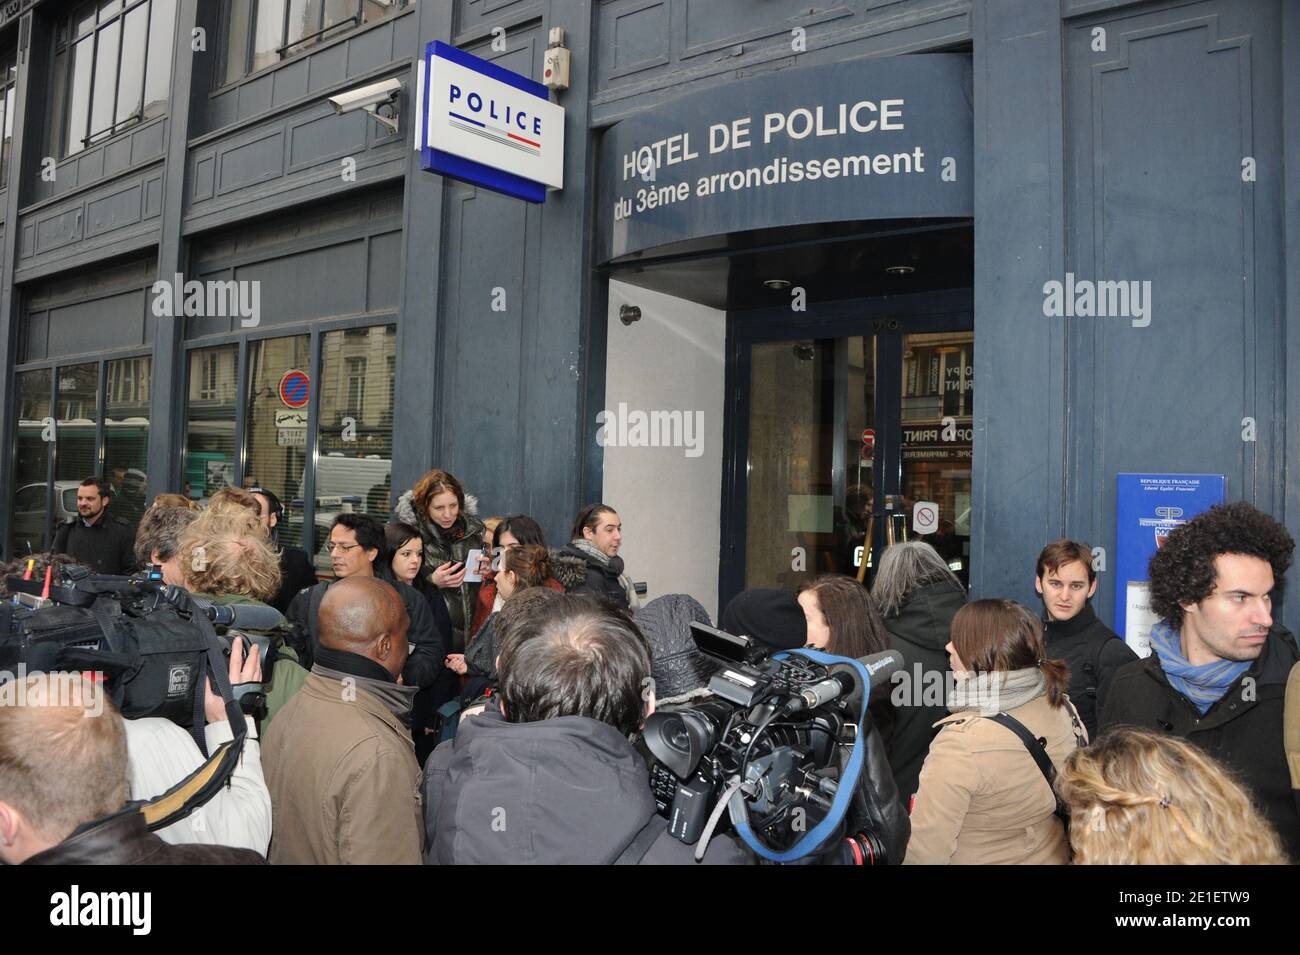 Atmosphere in front the 3rd arrondissement precinct where British designer John Galliano should be confronted with a couple accusing him of anti-Semitic comments in Paris, France on February, 28, 2011. John Galliano, the chief designer at Christian Dior since 1996, has been suspended from his duties at the fashion house after he was arrested for allegedly assaulting a woman and making anti-Semitic remarks at an outdoor Paris cafe 'La Perle'. Photo by ABACAPRESS.COM Stock Photo